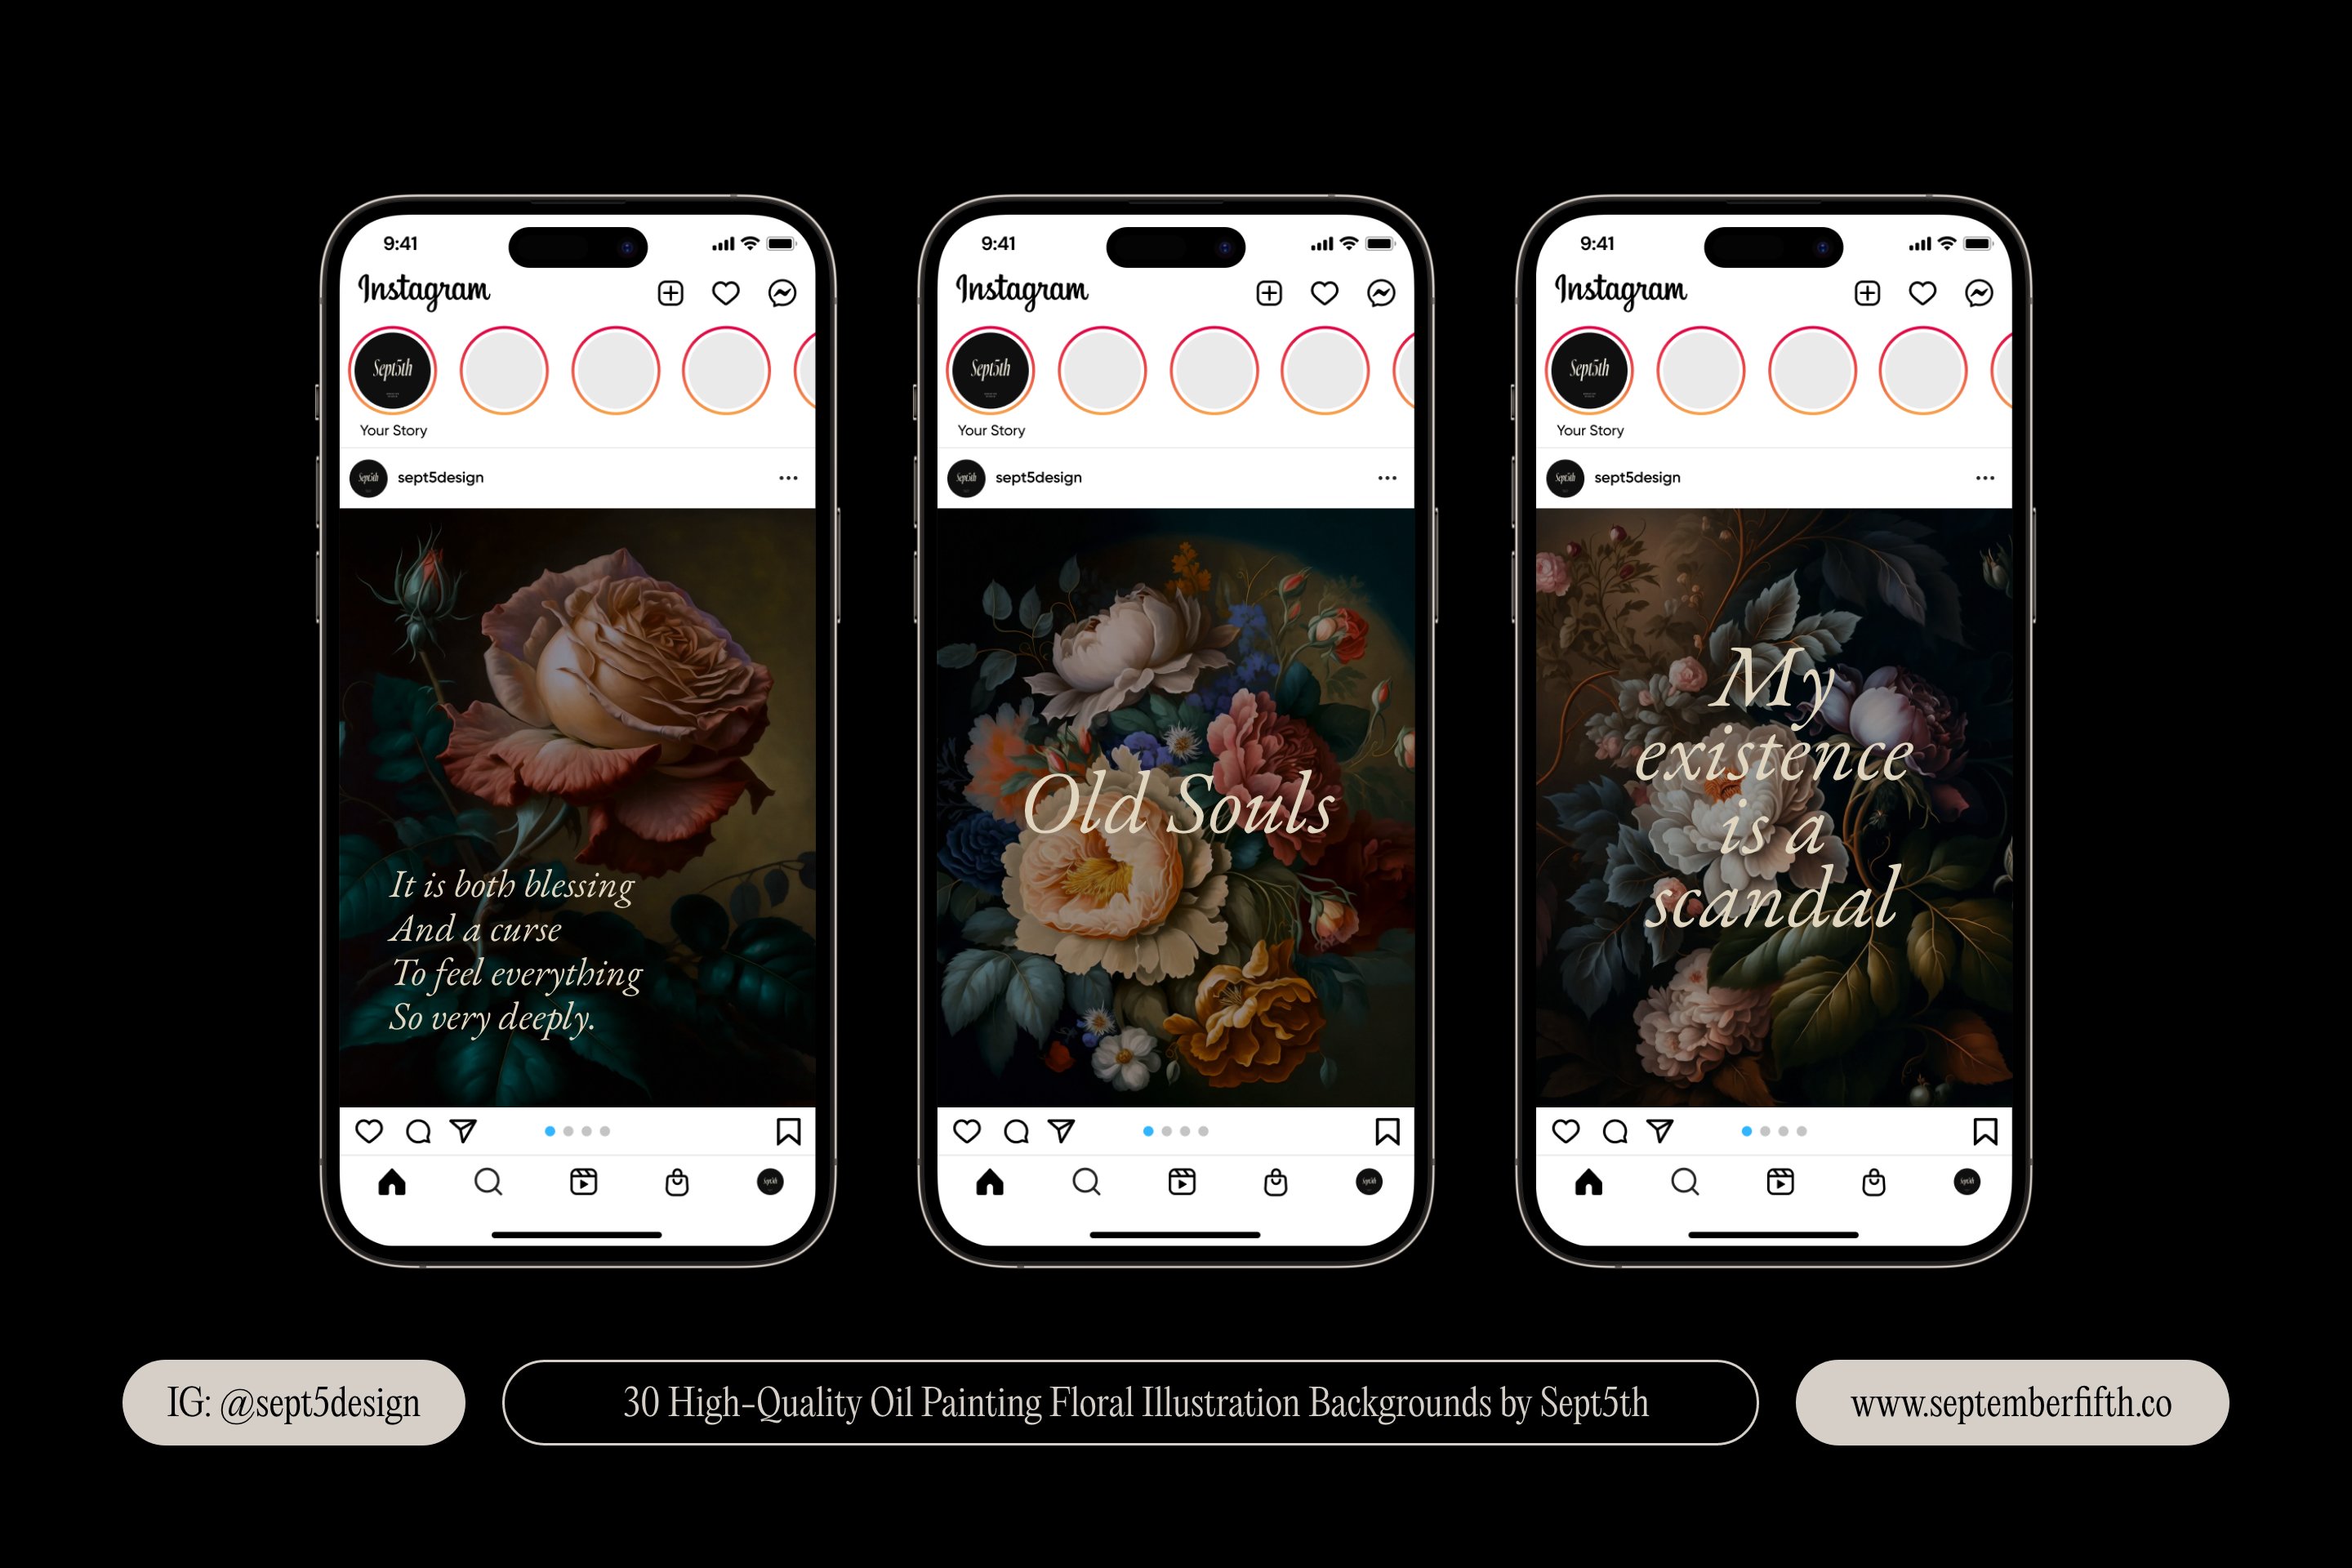 These floral illustrations has a responsive and mobile friendly design.